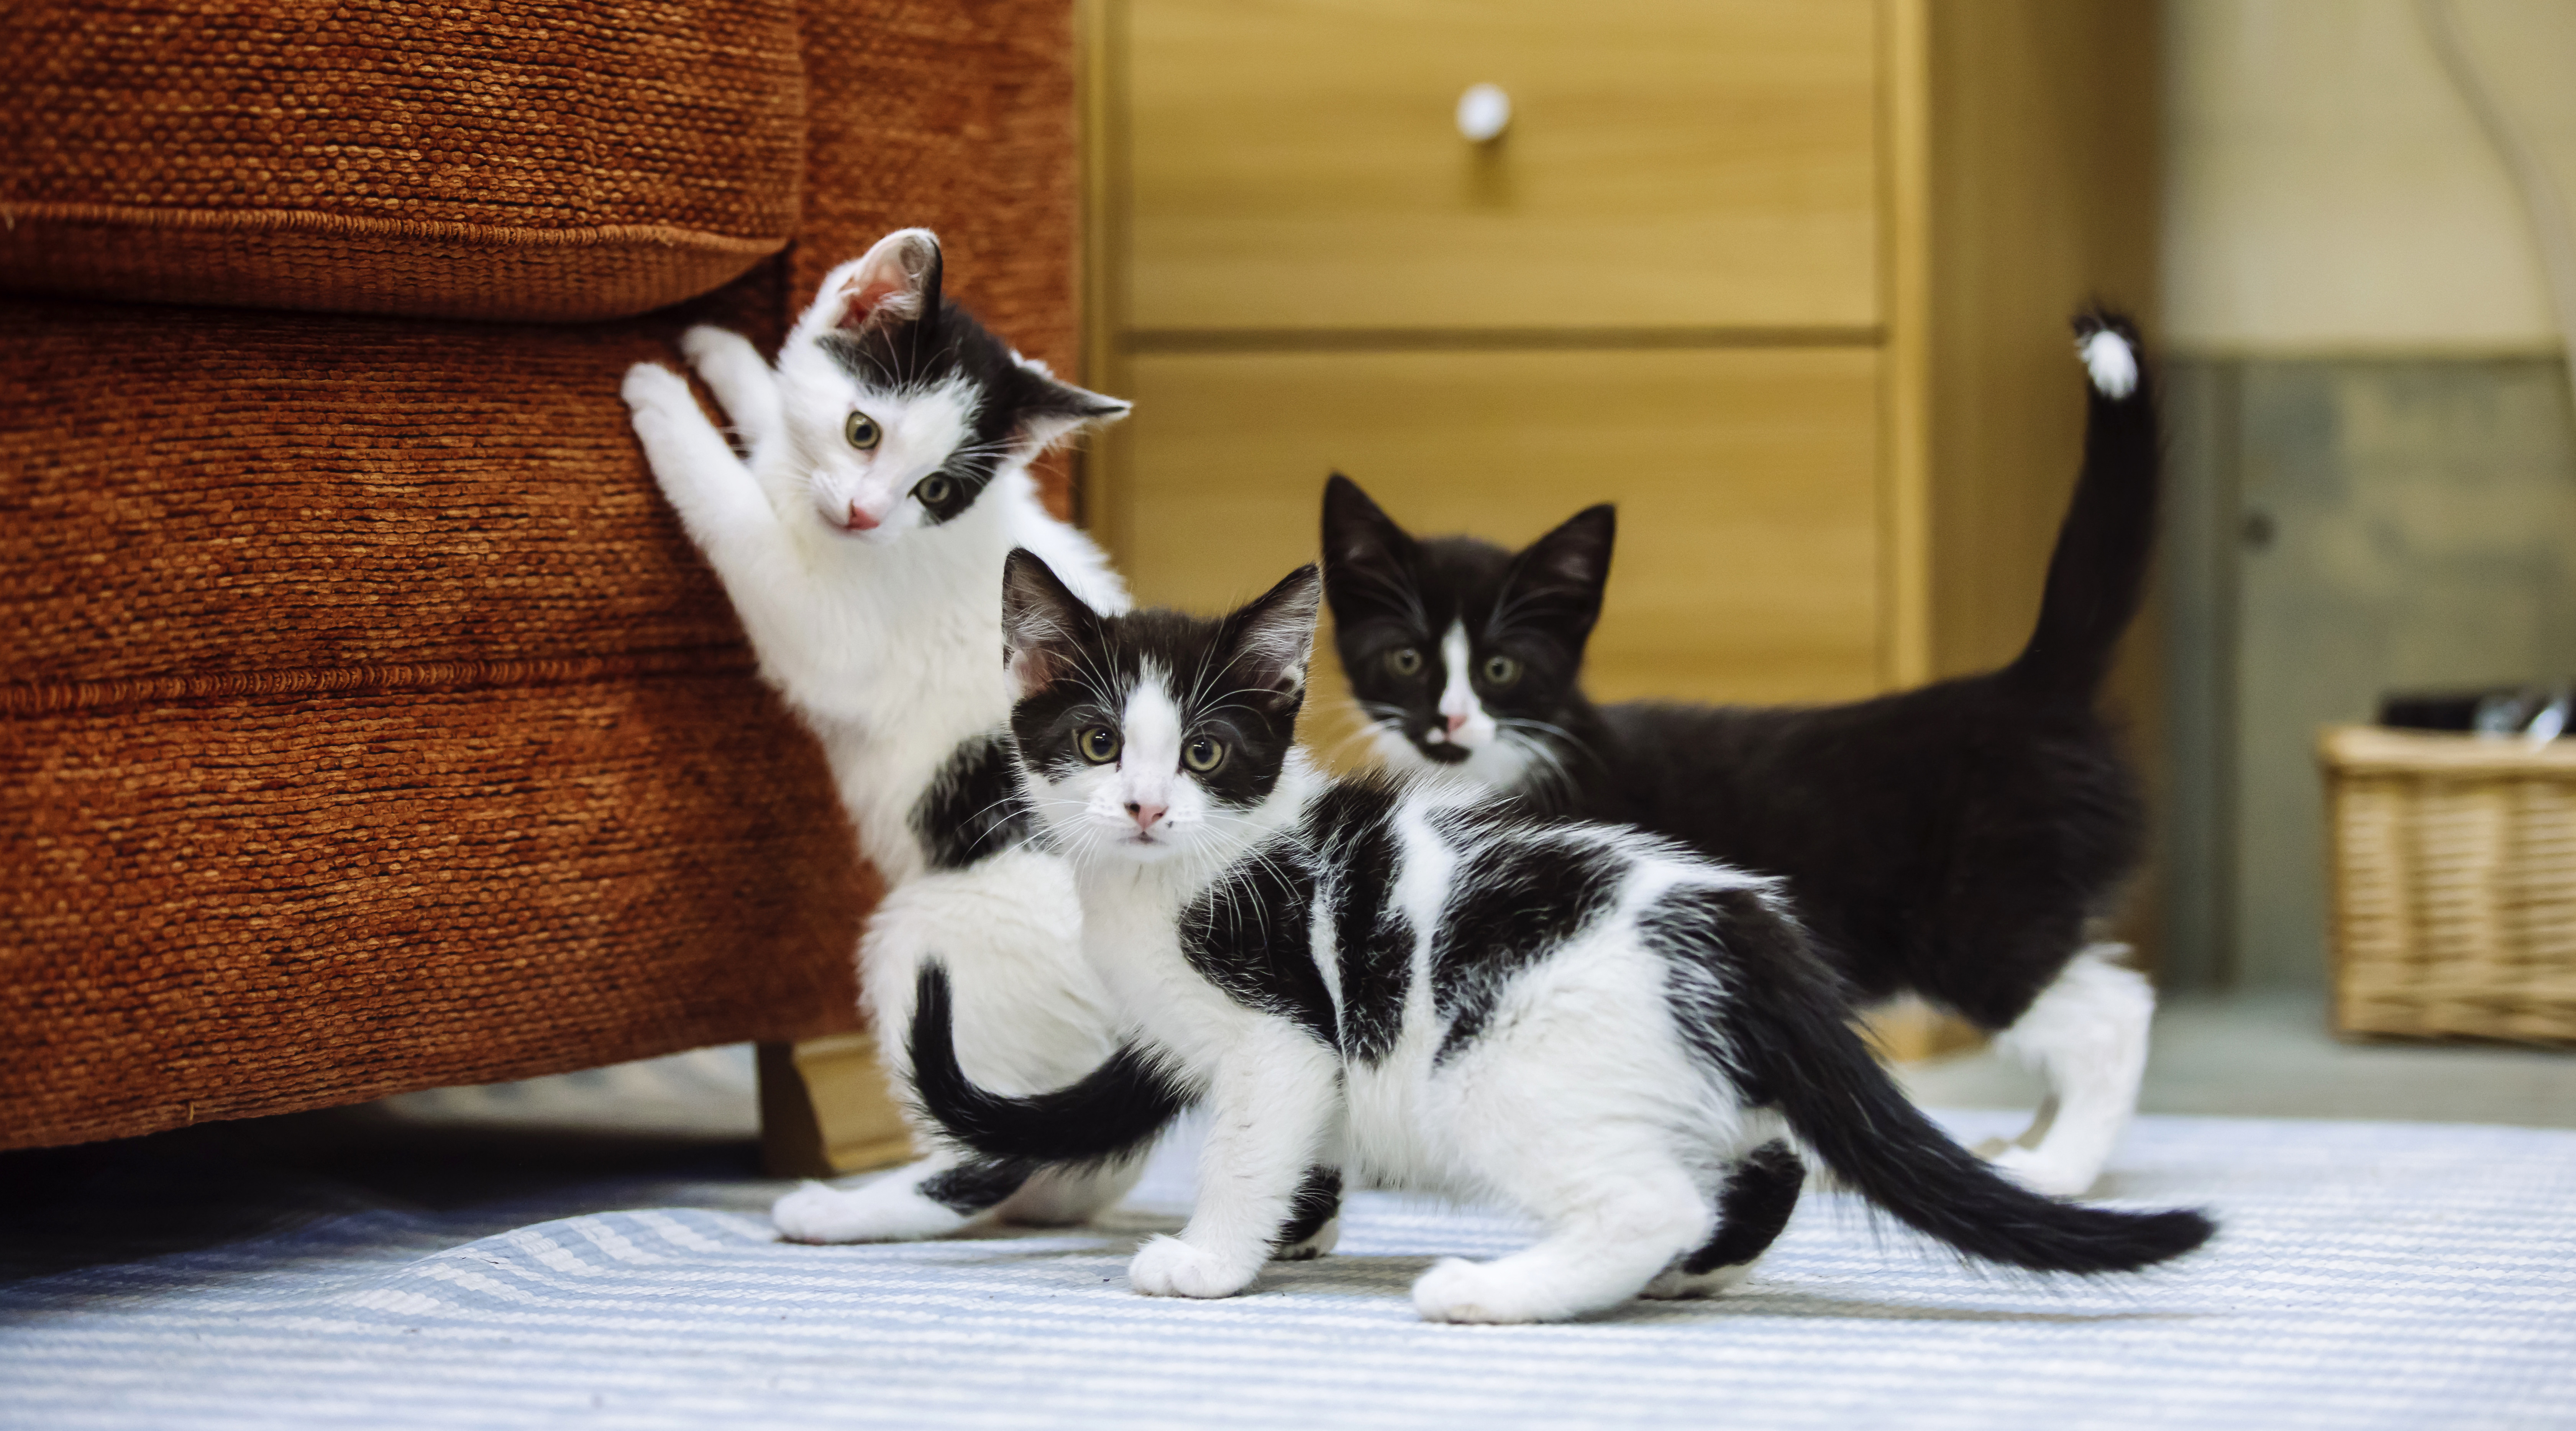 Three black and white kittens play. One has their paws up on a sofa and the others look towards the camera.